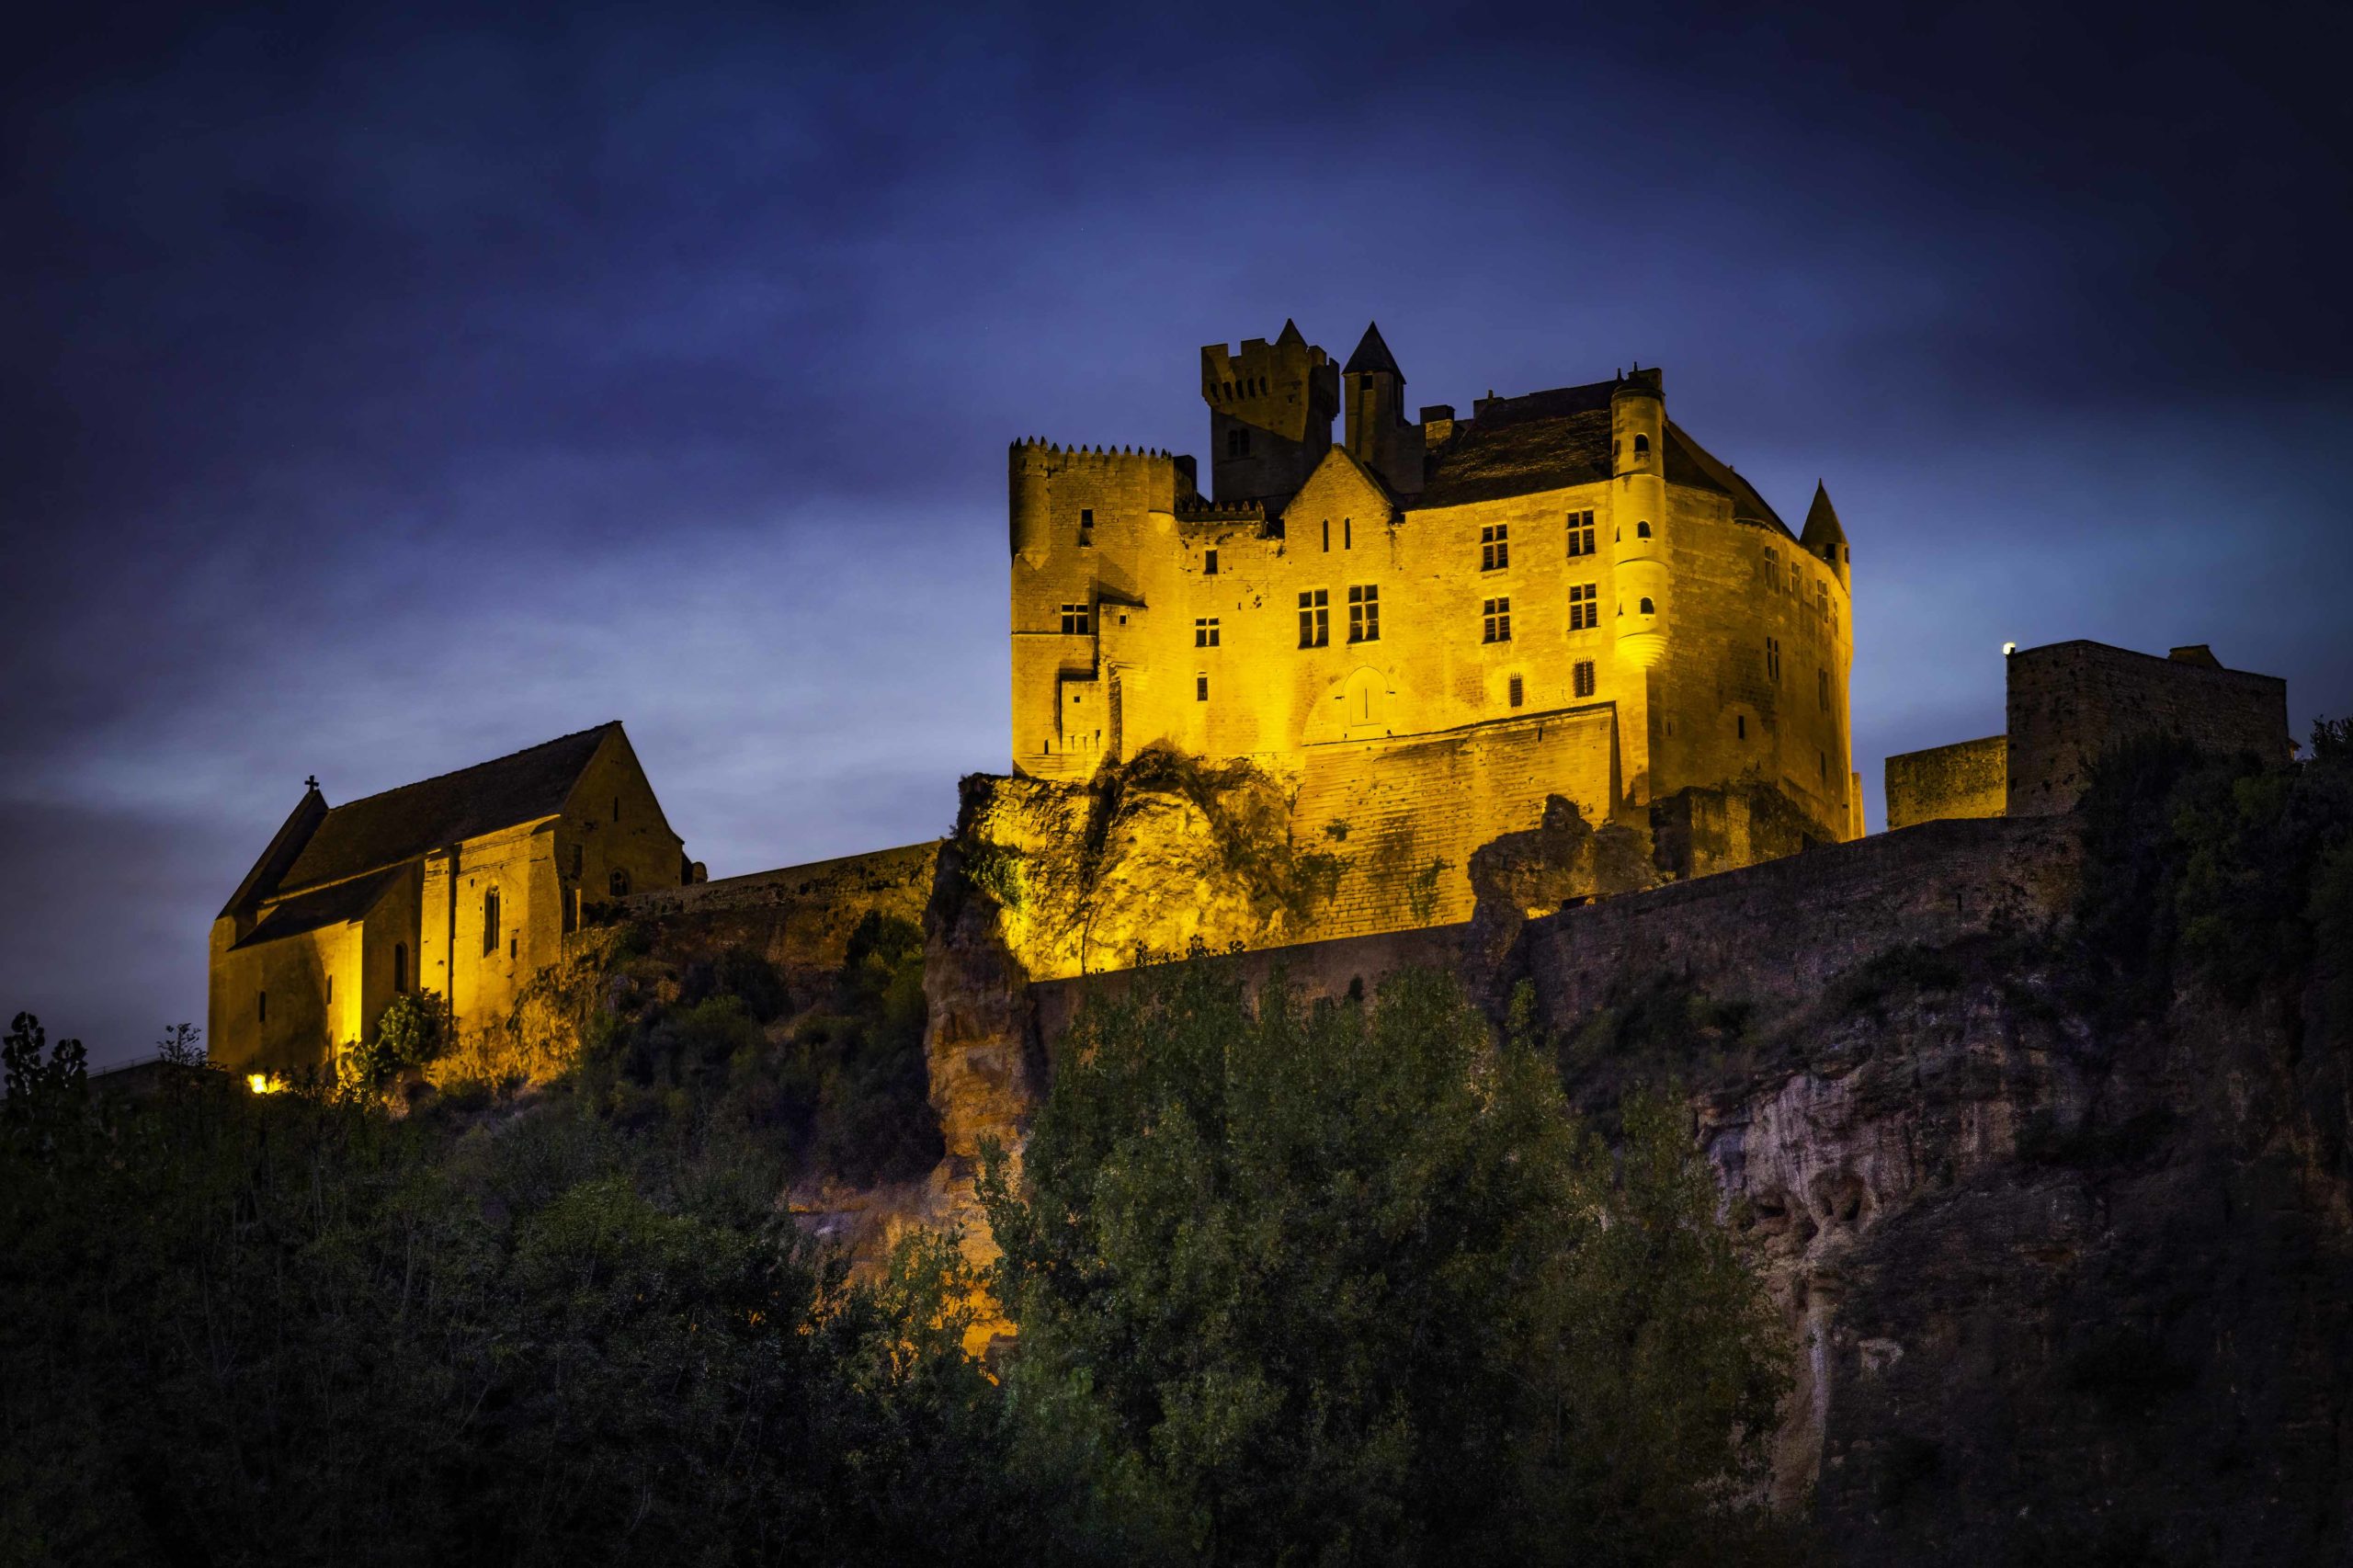 Beynac by night. Photo by compuinfoto via Envato Elements